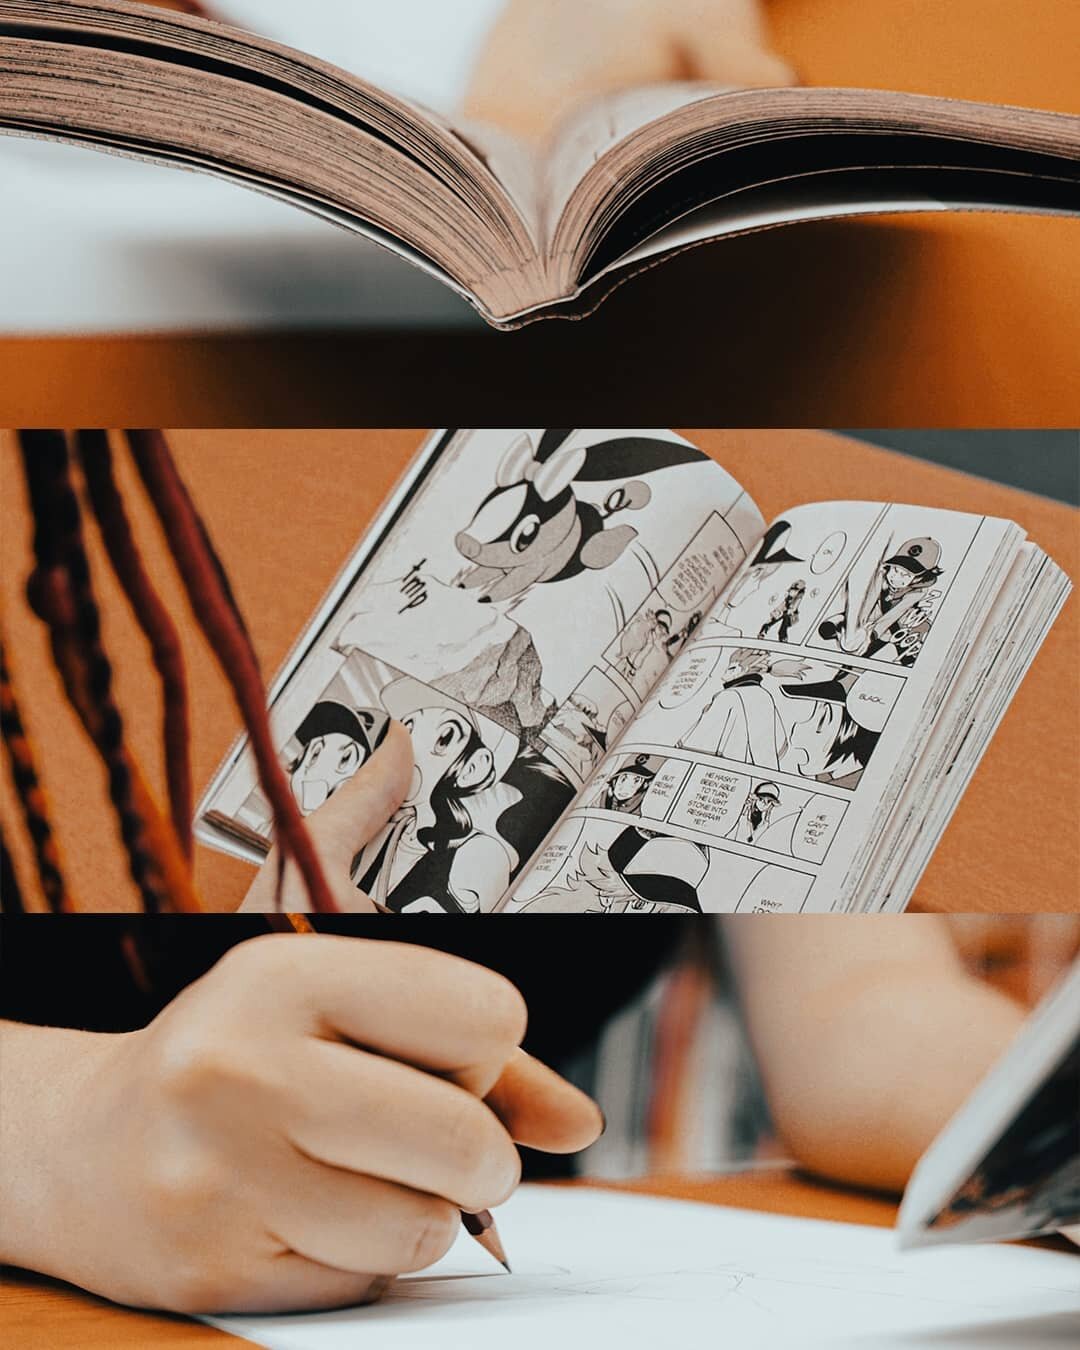 Had a great time filming with @suffolklibraries last week! Especially when the Pok&eacute;mon manga made an appearance. 👀🎥